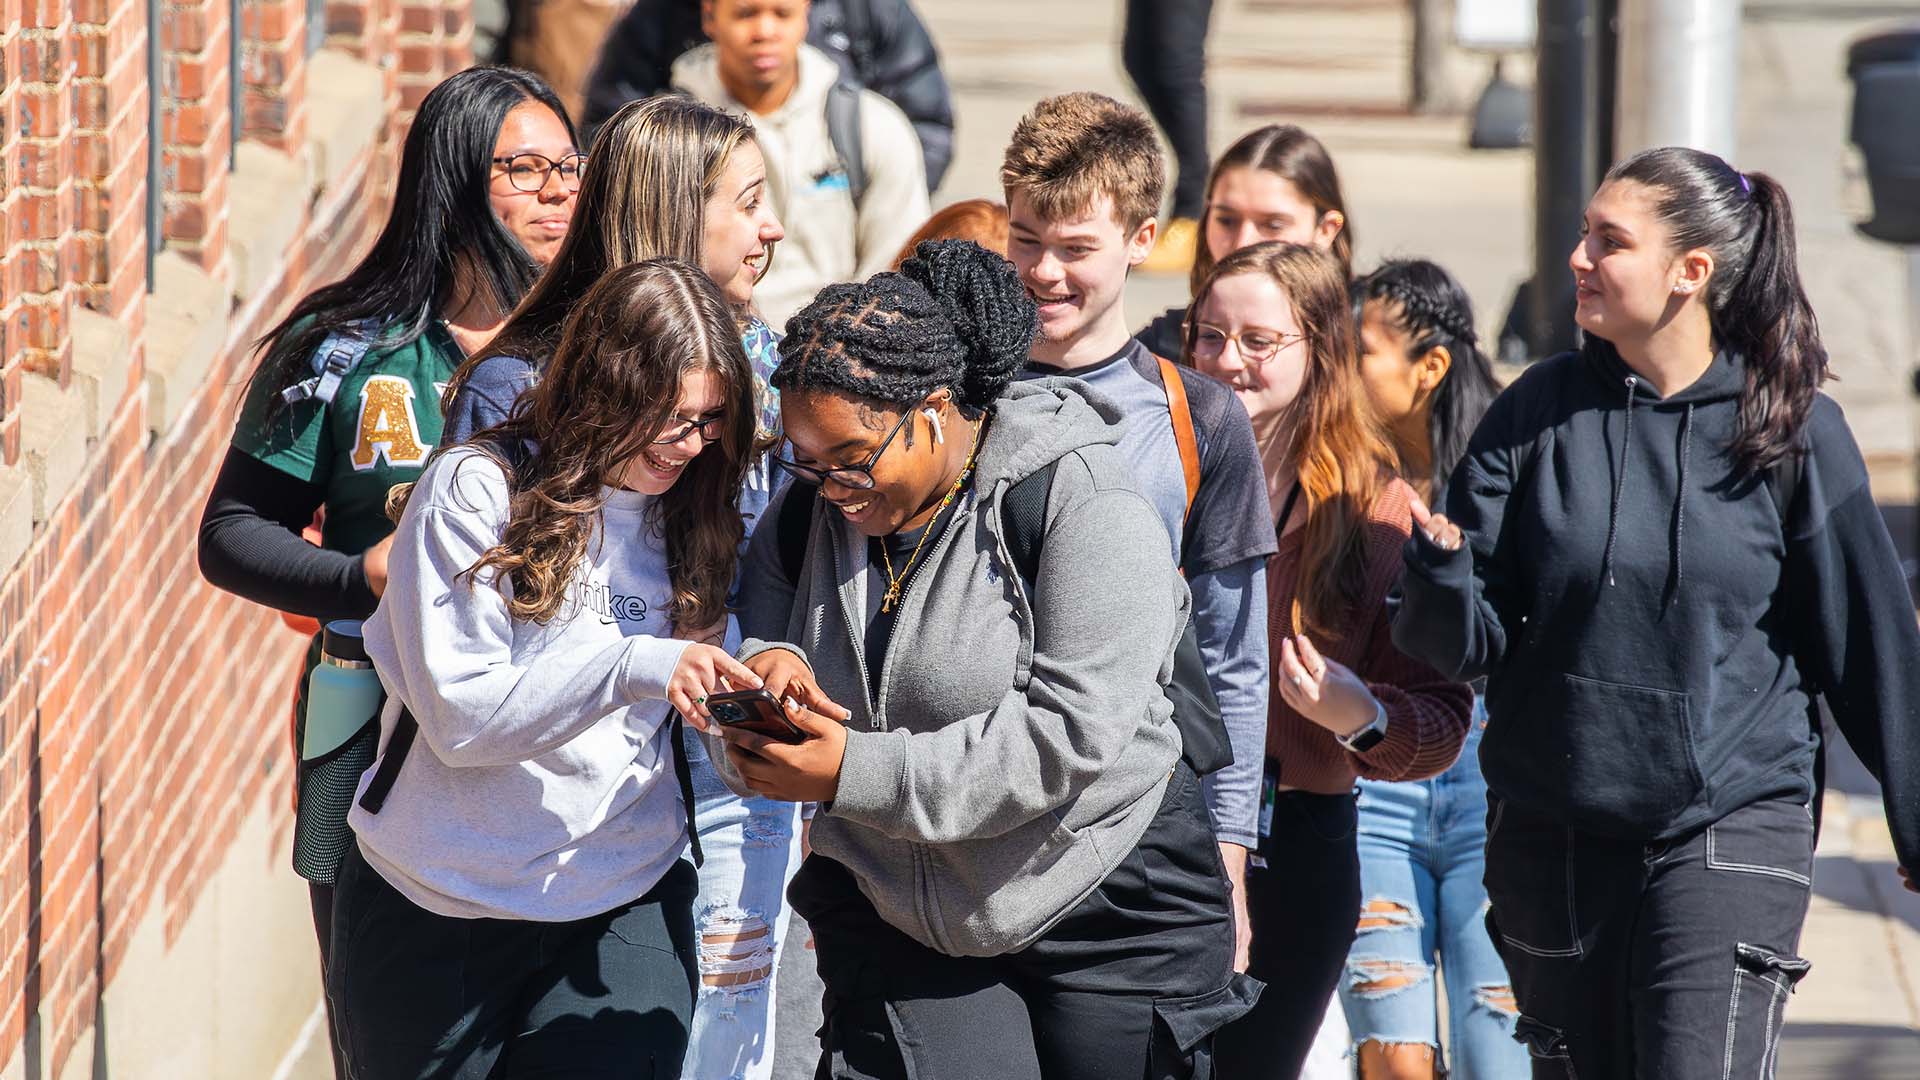 Students walking down the street while looking at a phone screen